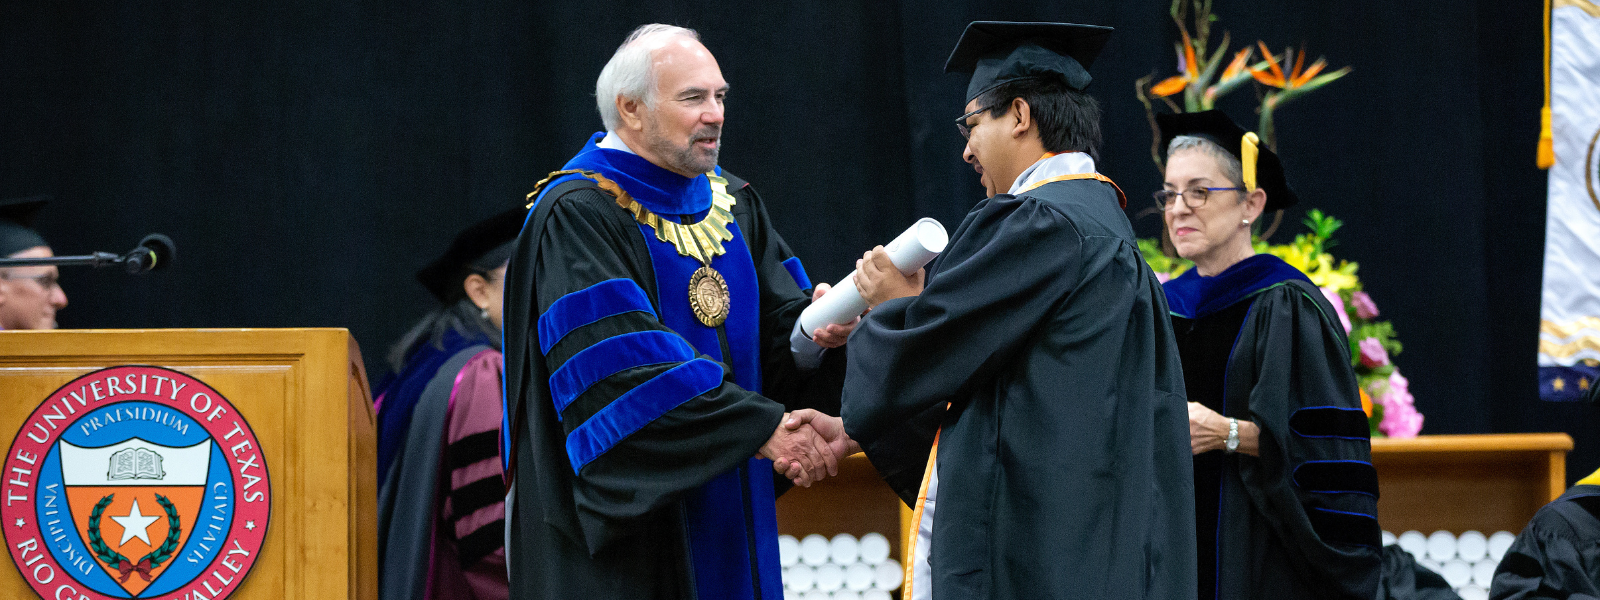 President Bailey presents a white diploma case to a student during the graduation commencement ceremony.